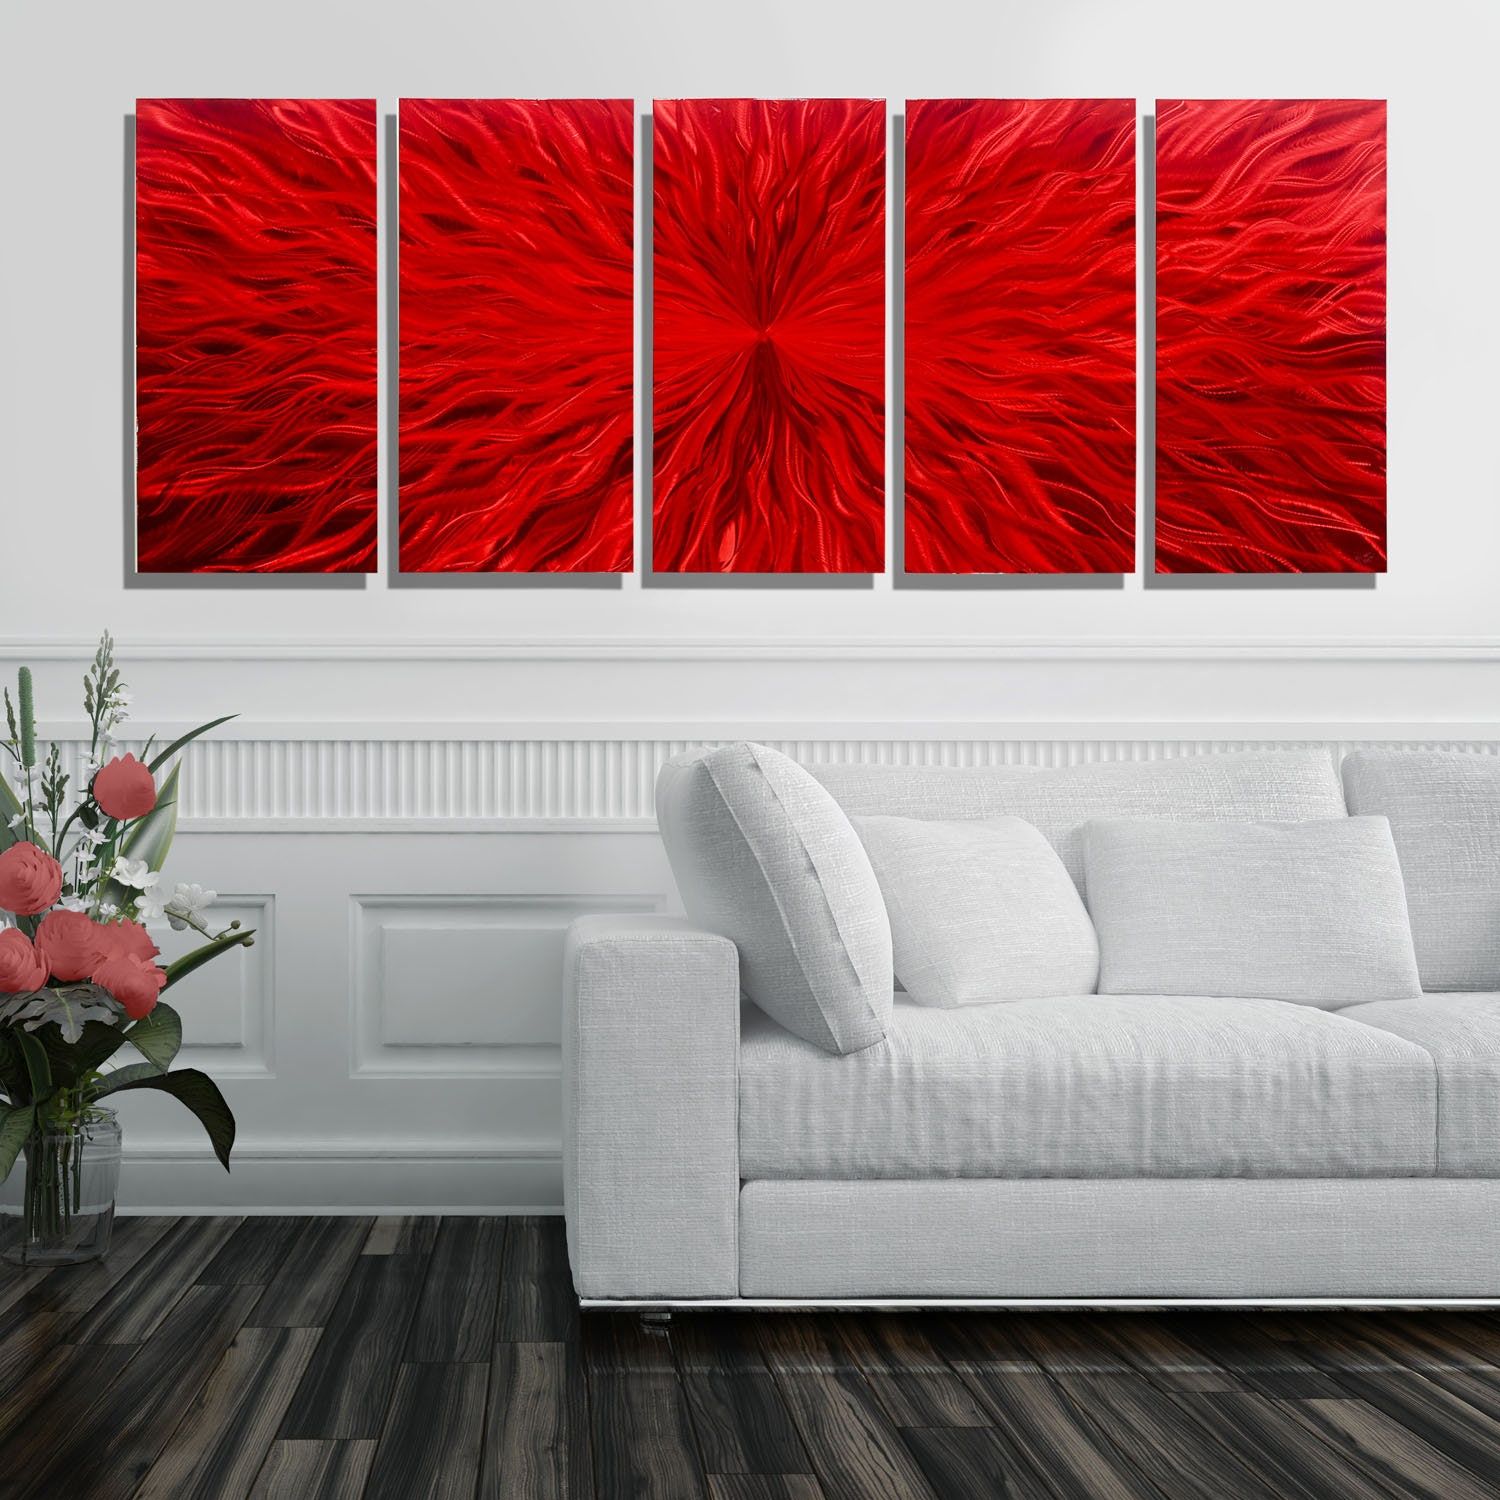 Sale Large Multi Panel Modern Metal Wall Art In Red Abstract With Current Multi Color Metal Wall Art (View 6 of 20)